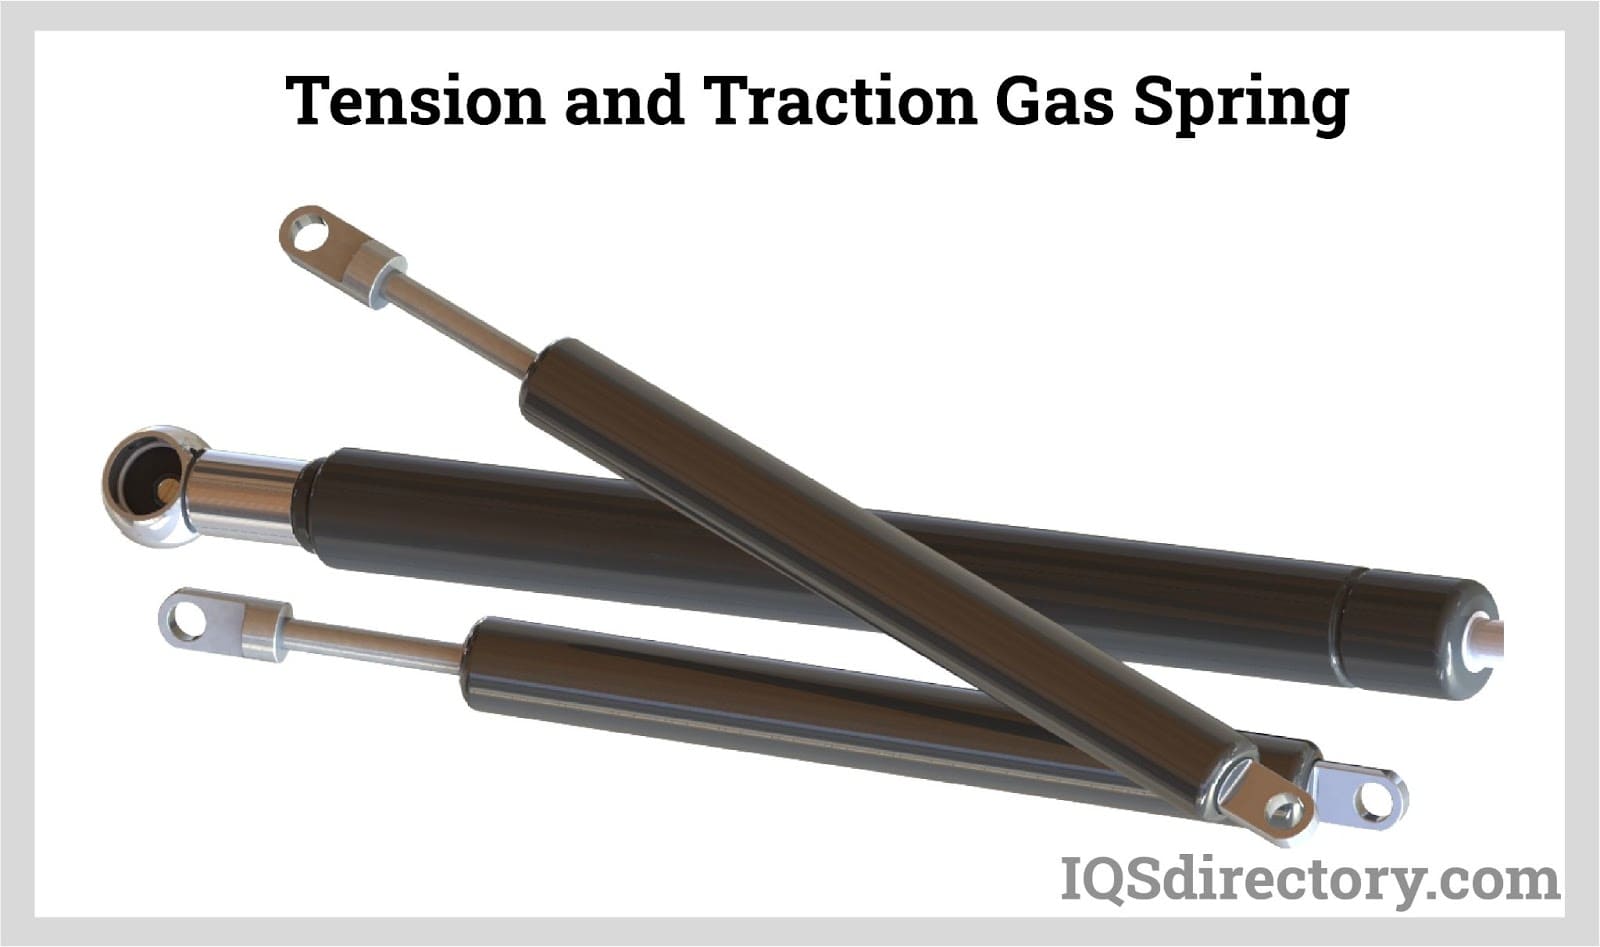 Tension and Traction Gas Spring